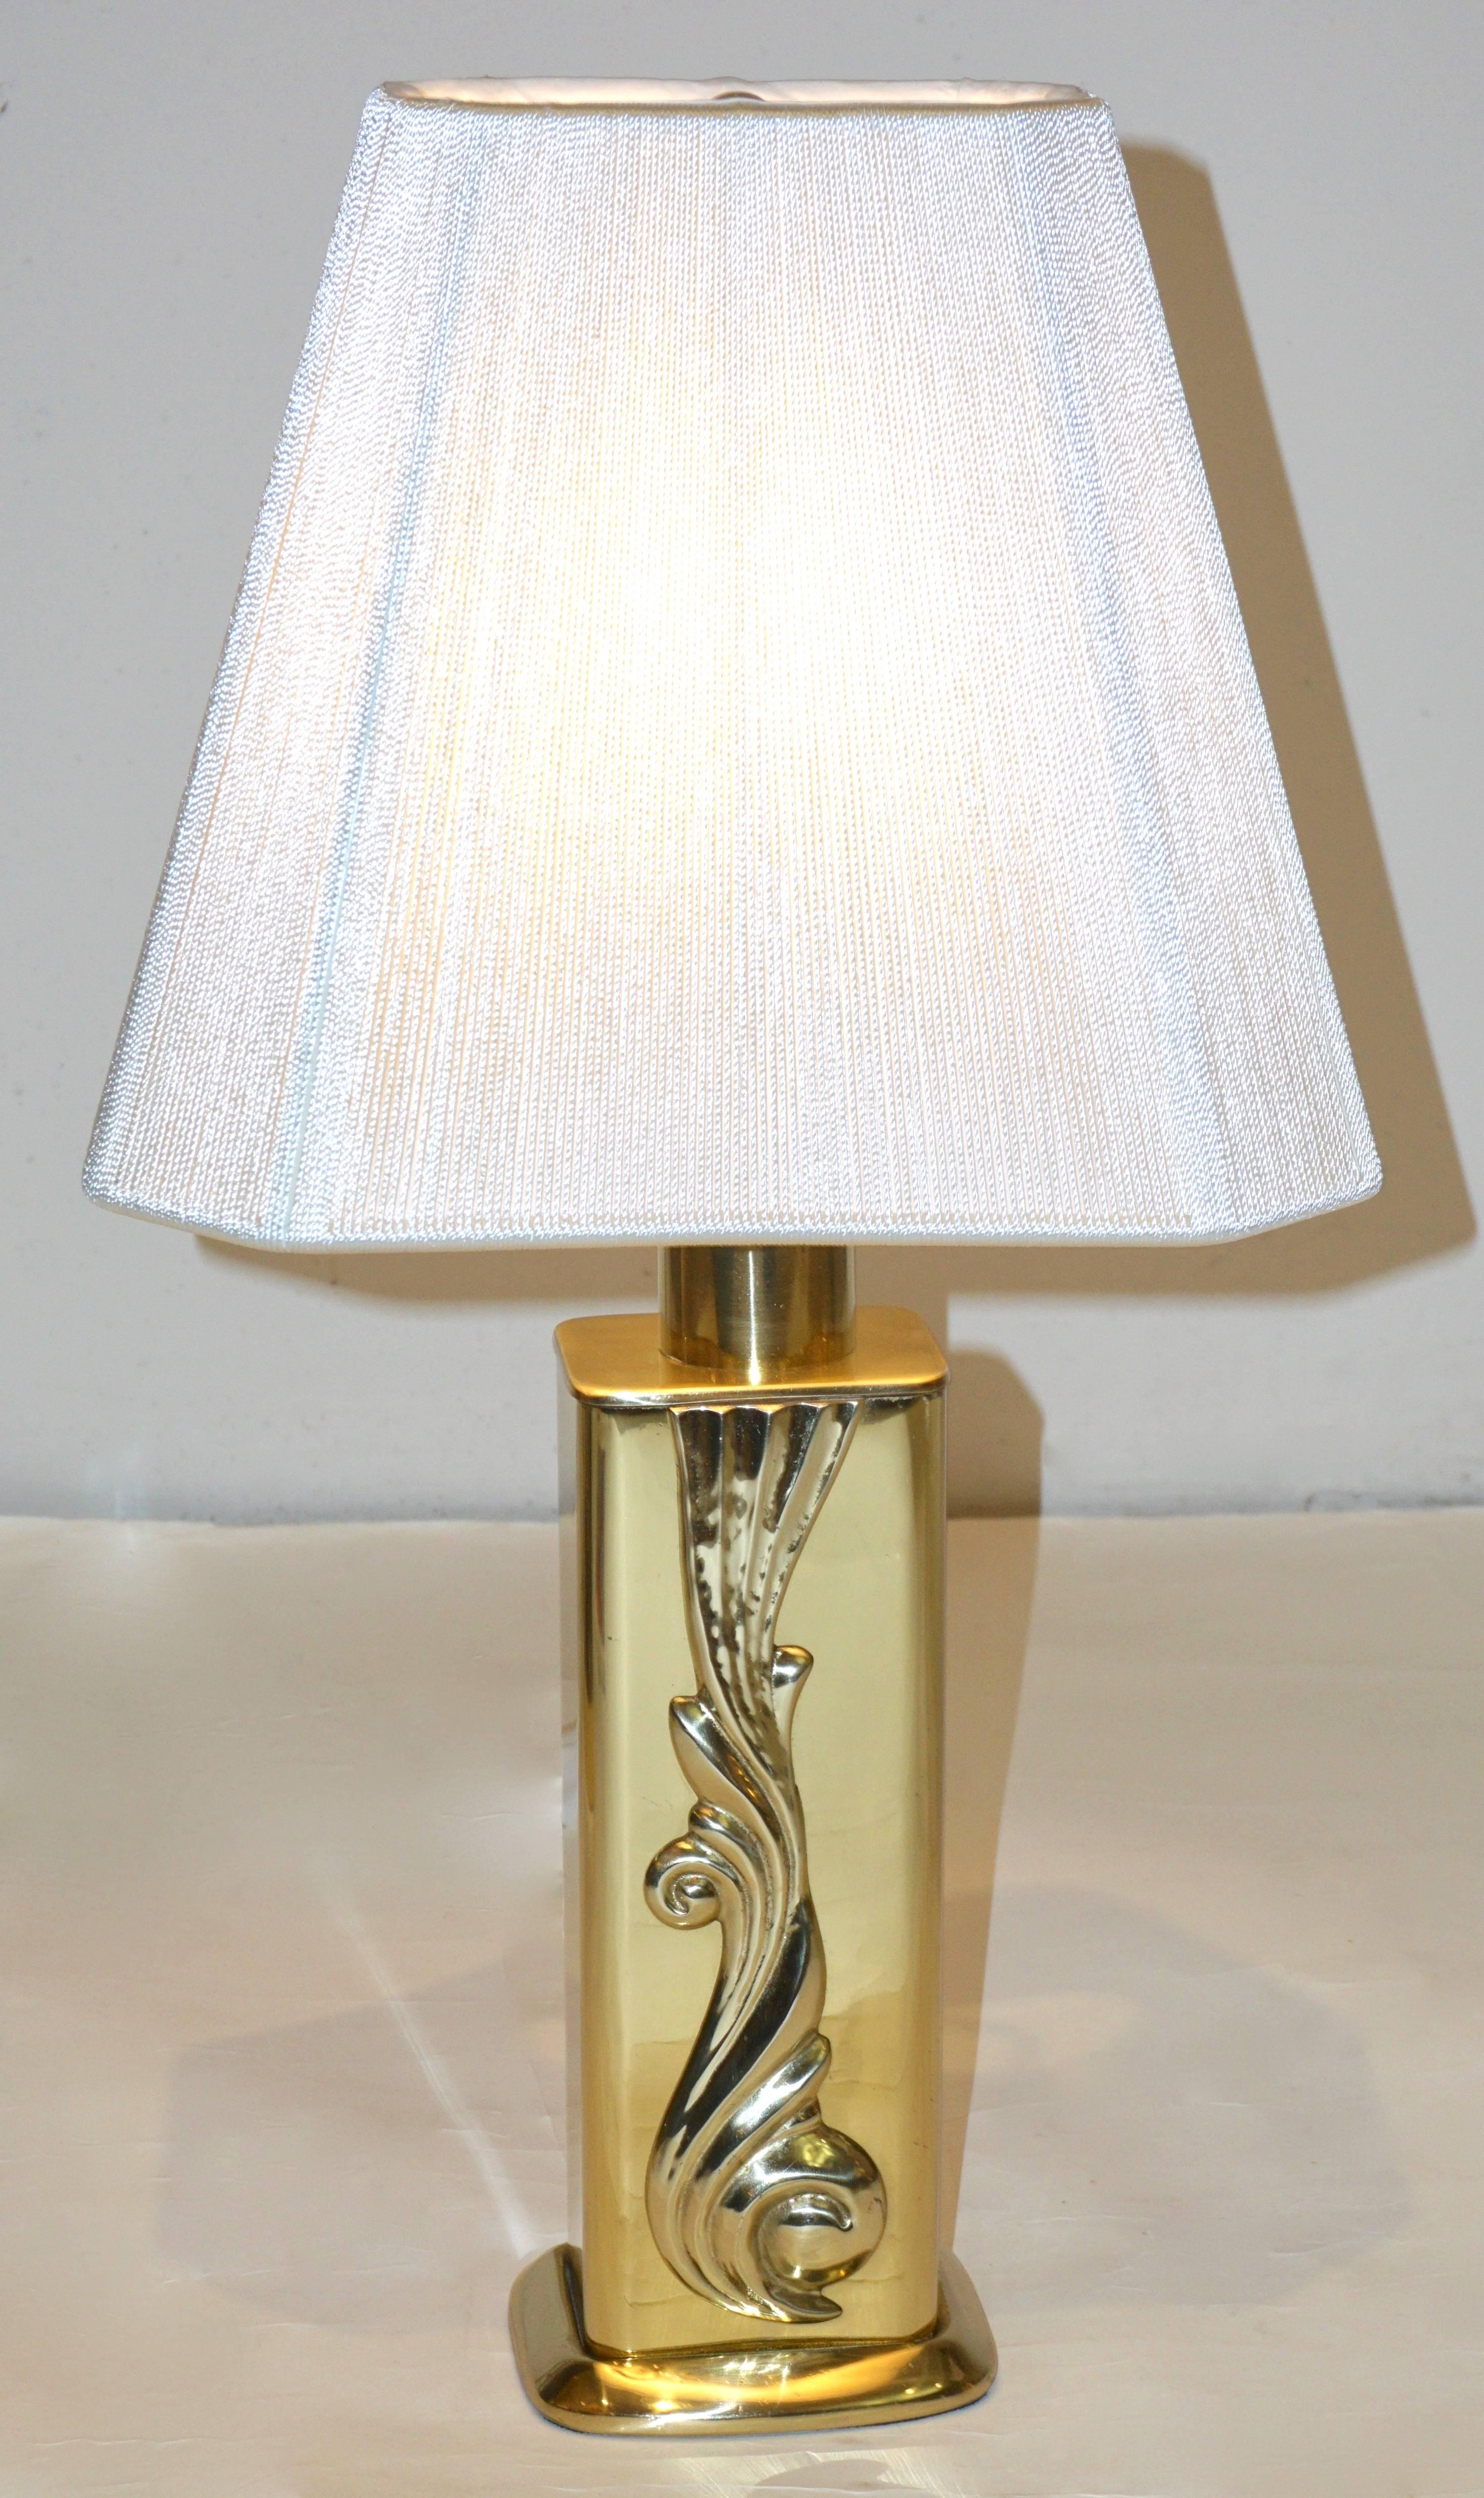 Mid-20th Century Lipparini 1960s Italian Vintage Pair of Gold Brass Lamps with White Silk Shades